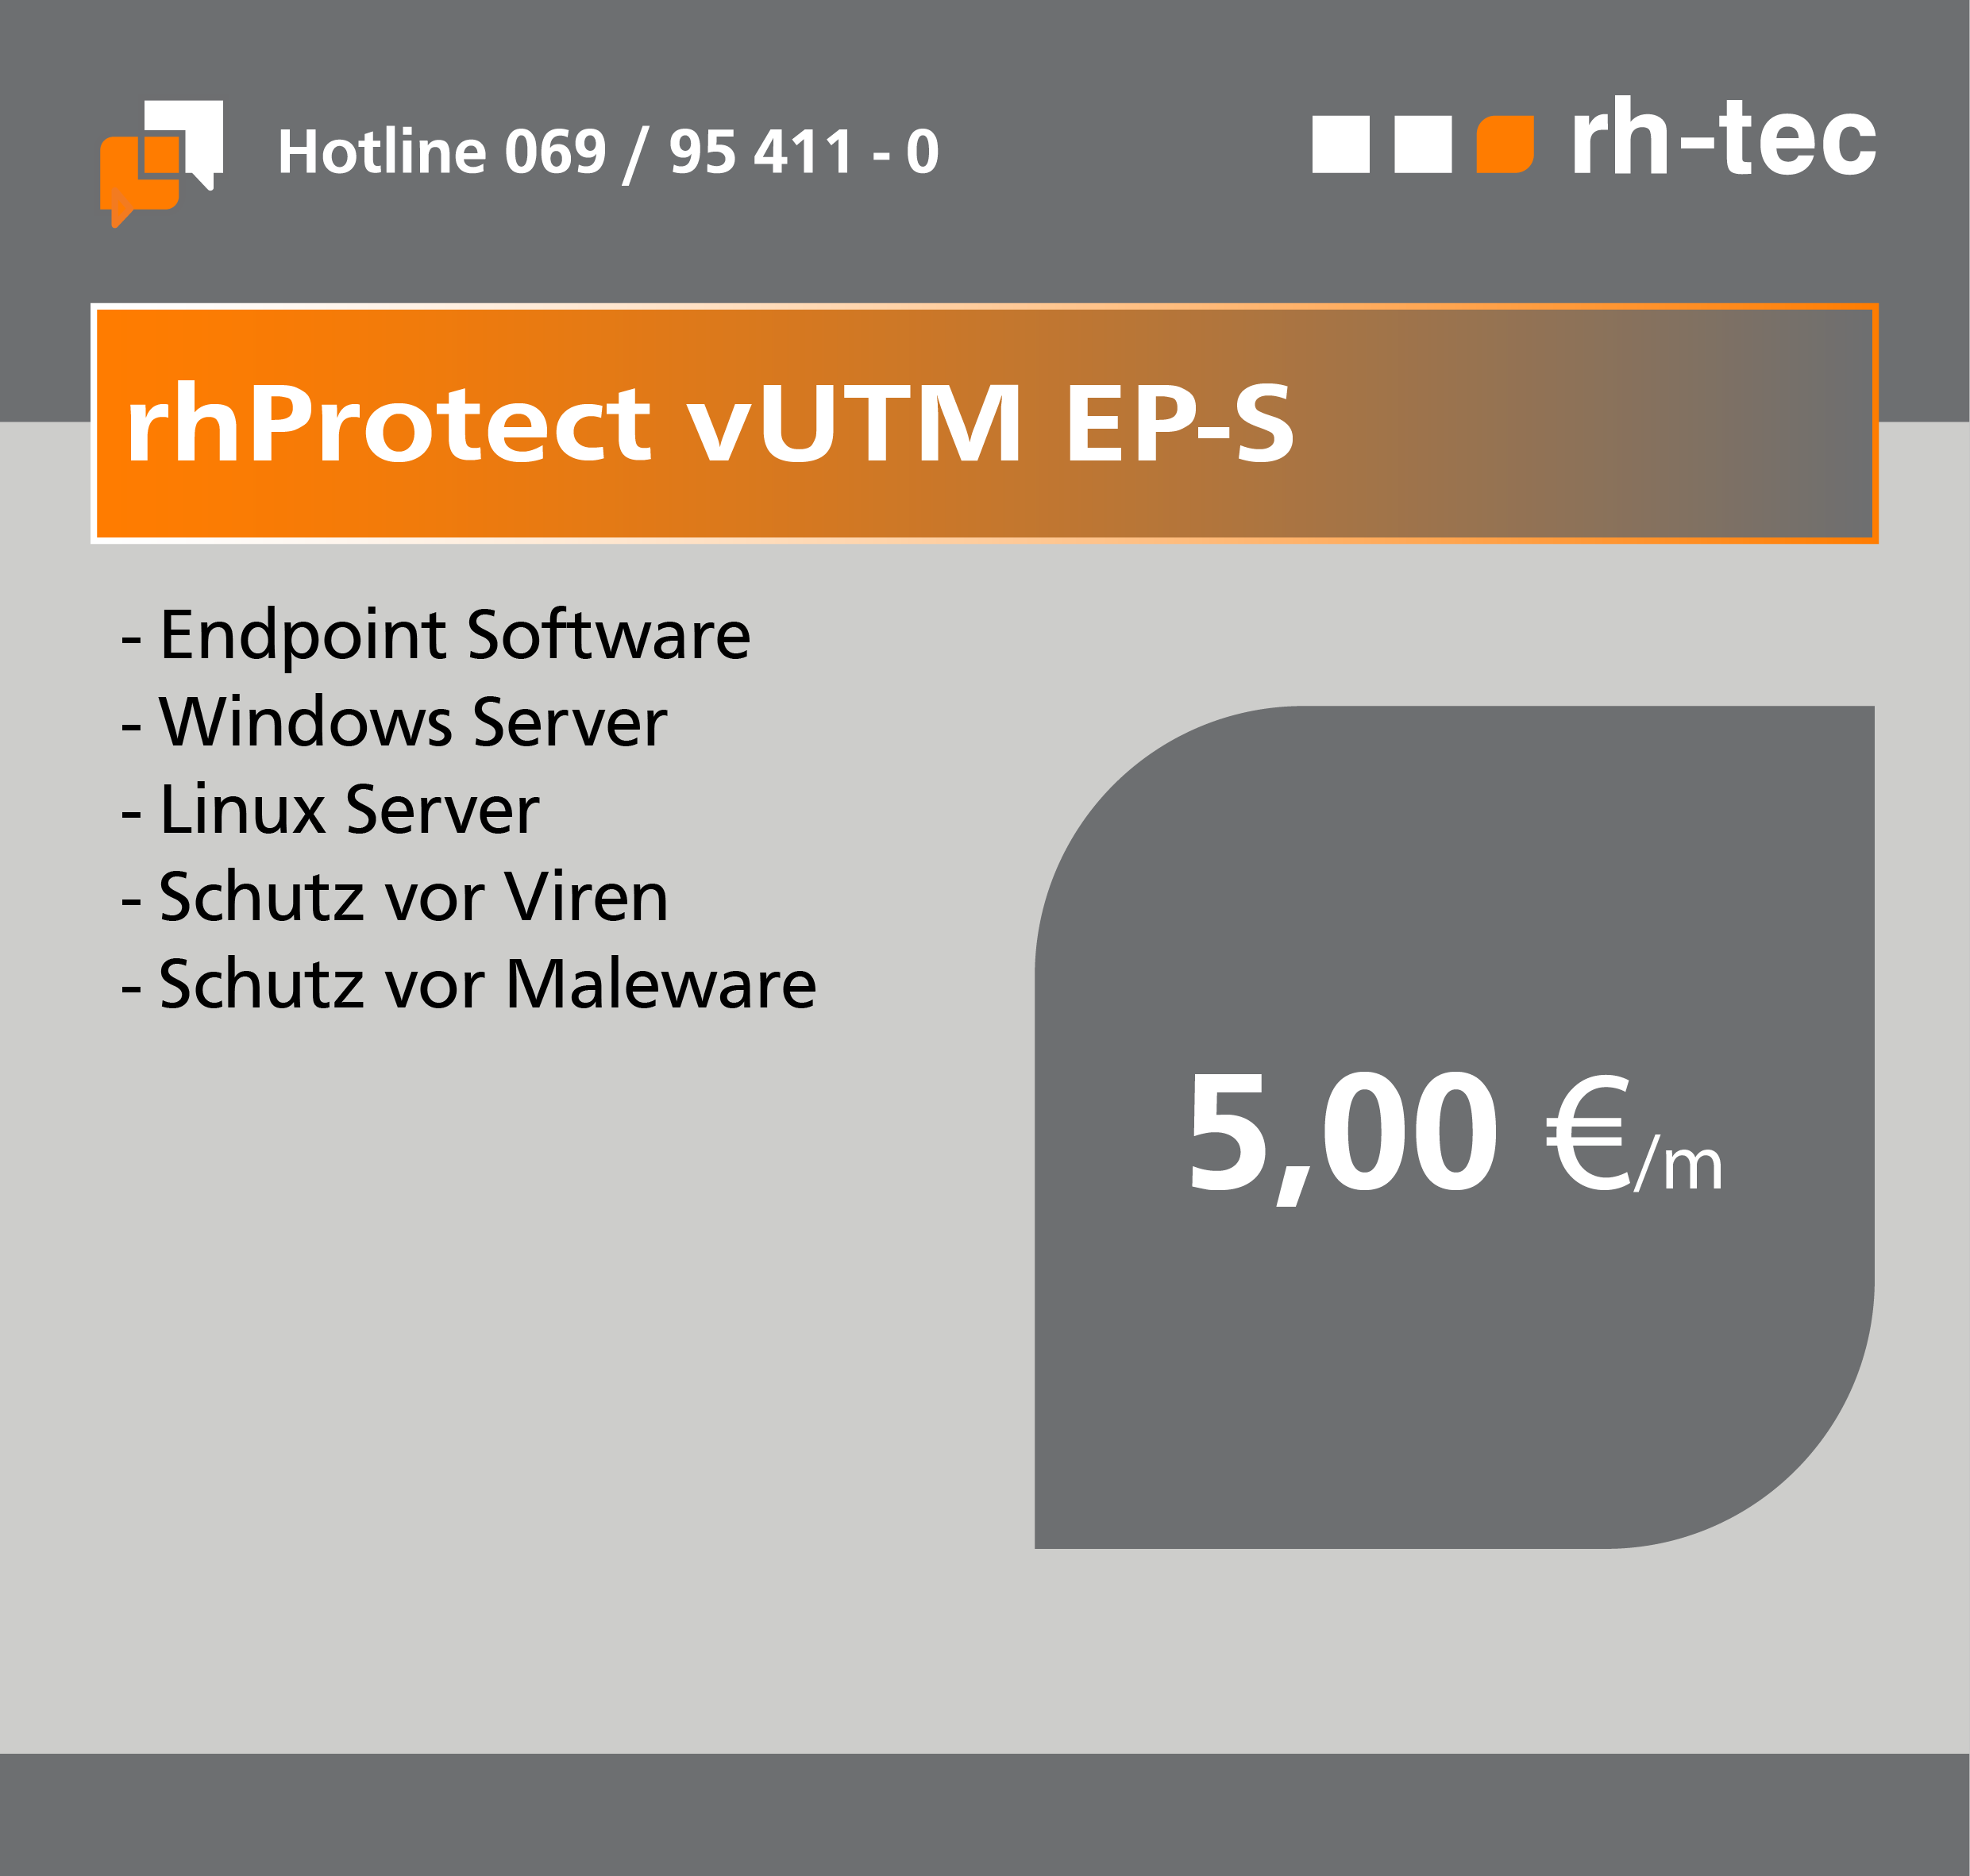 rhProtect vUTM EP-S